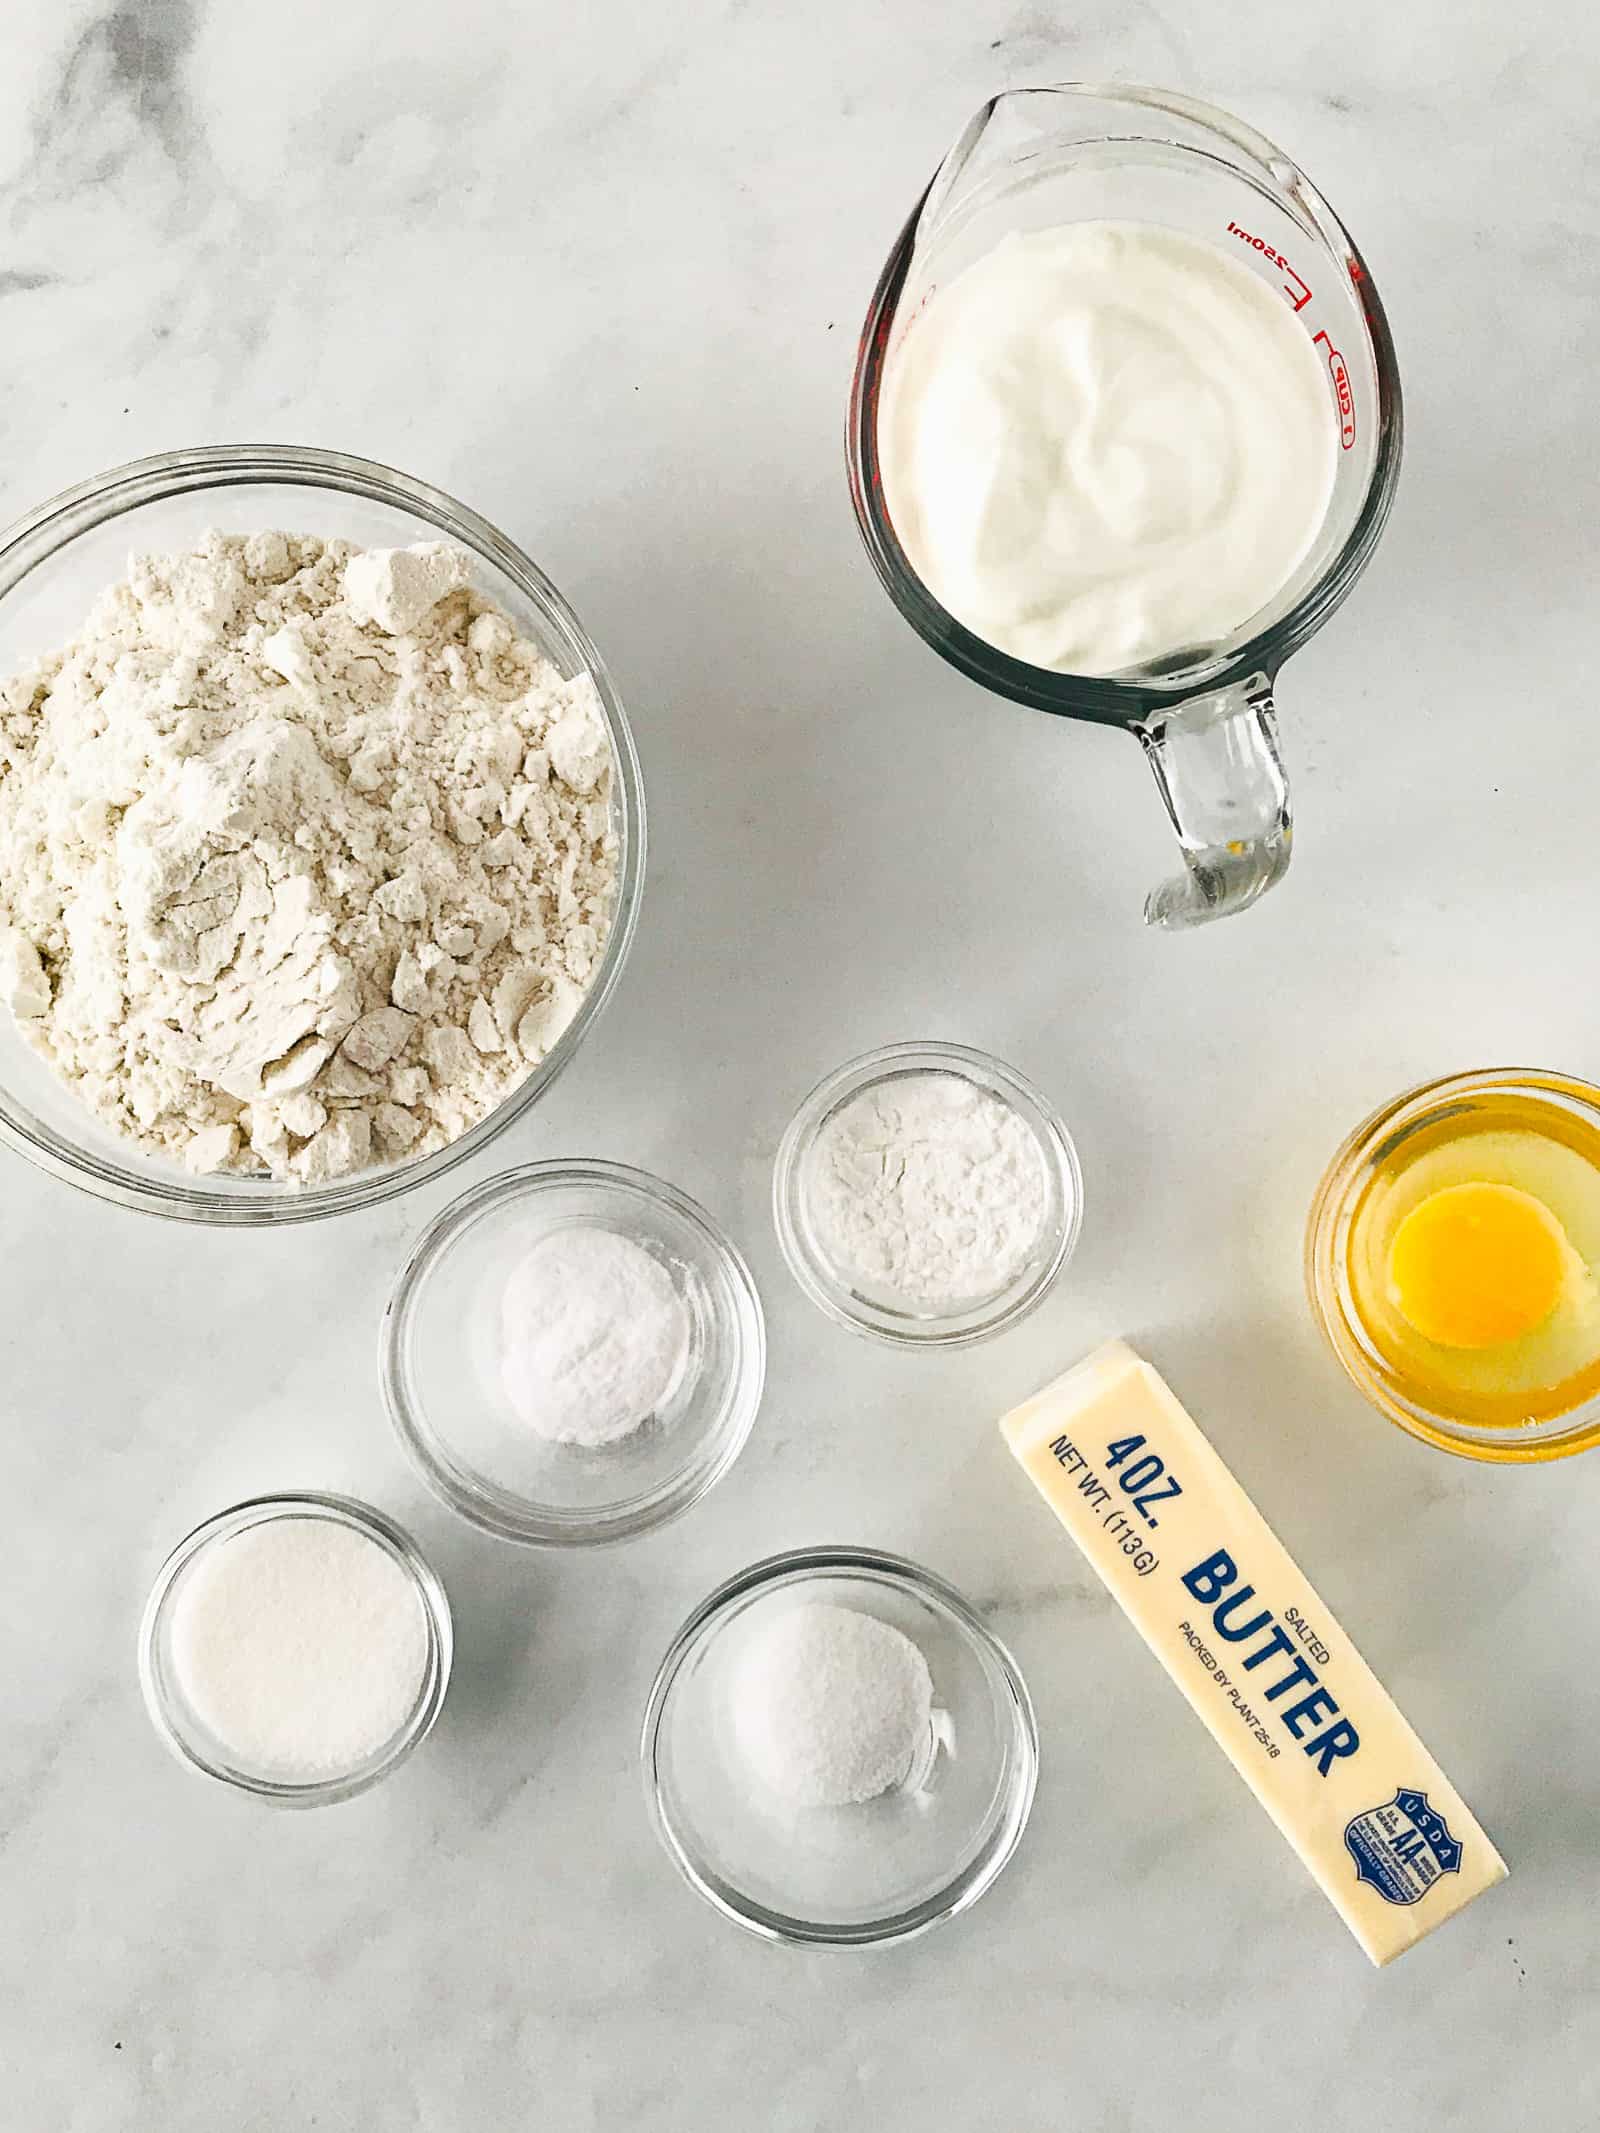 Ingredients for gluten-free biscuit recipe on a marble counter.